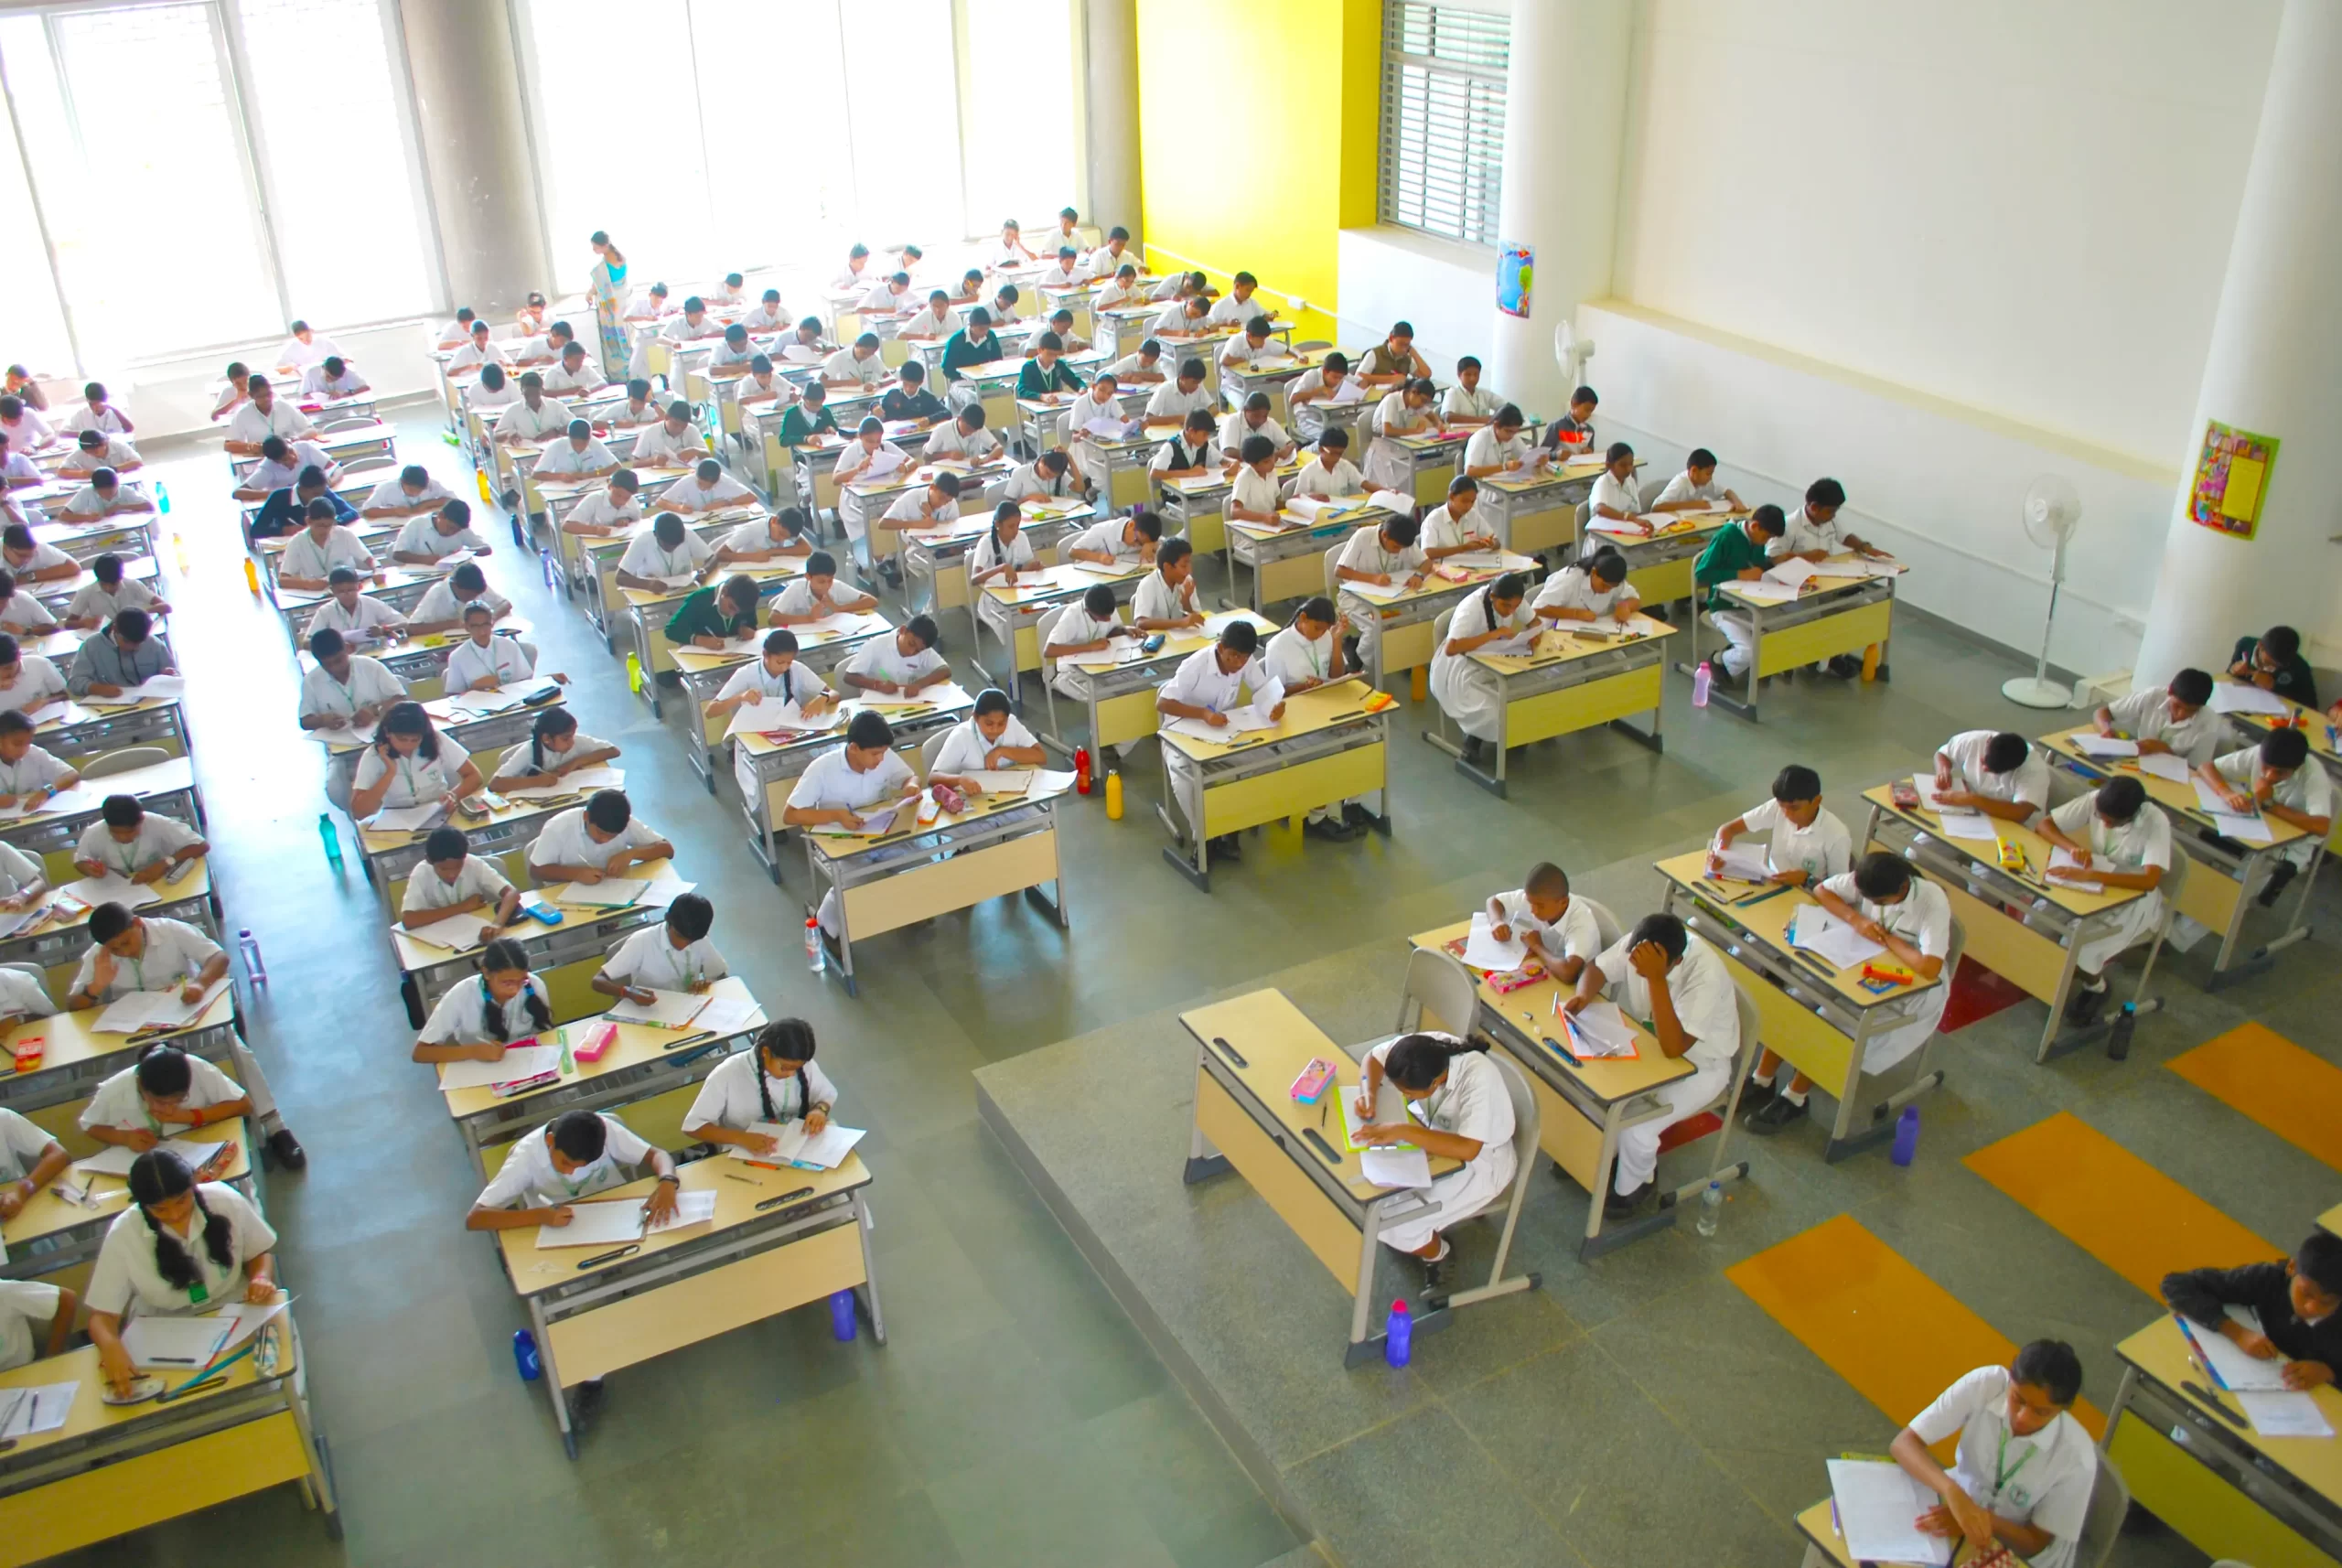 Students attempting their exam papers, while sitting in the examination hall.